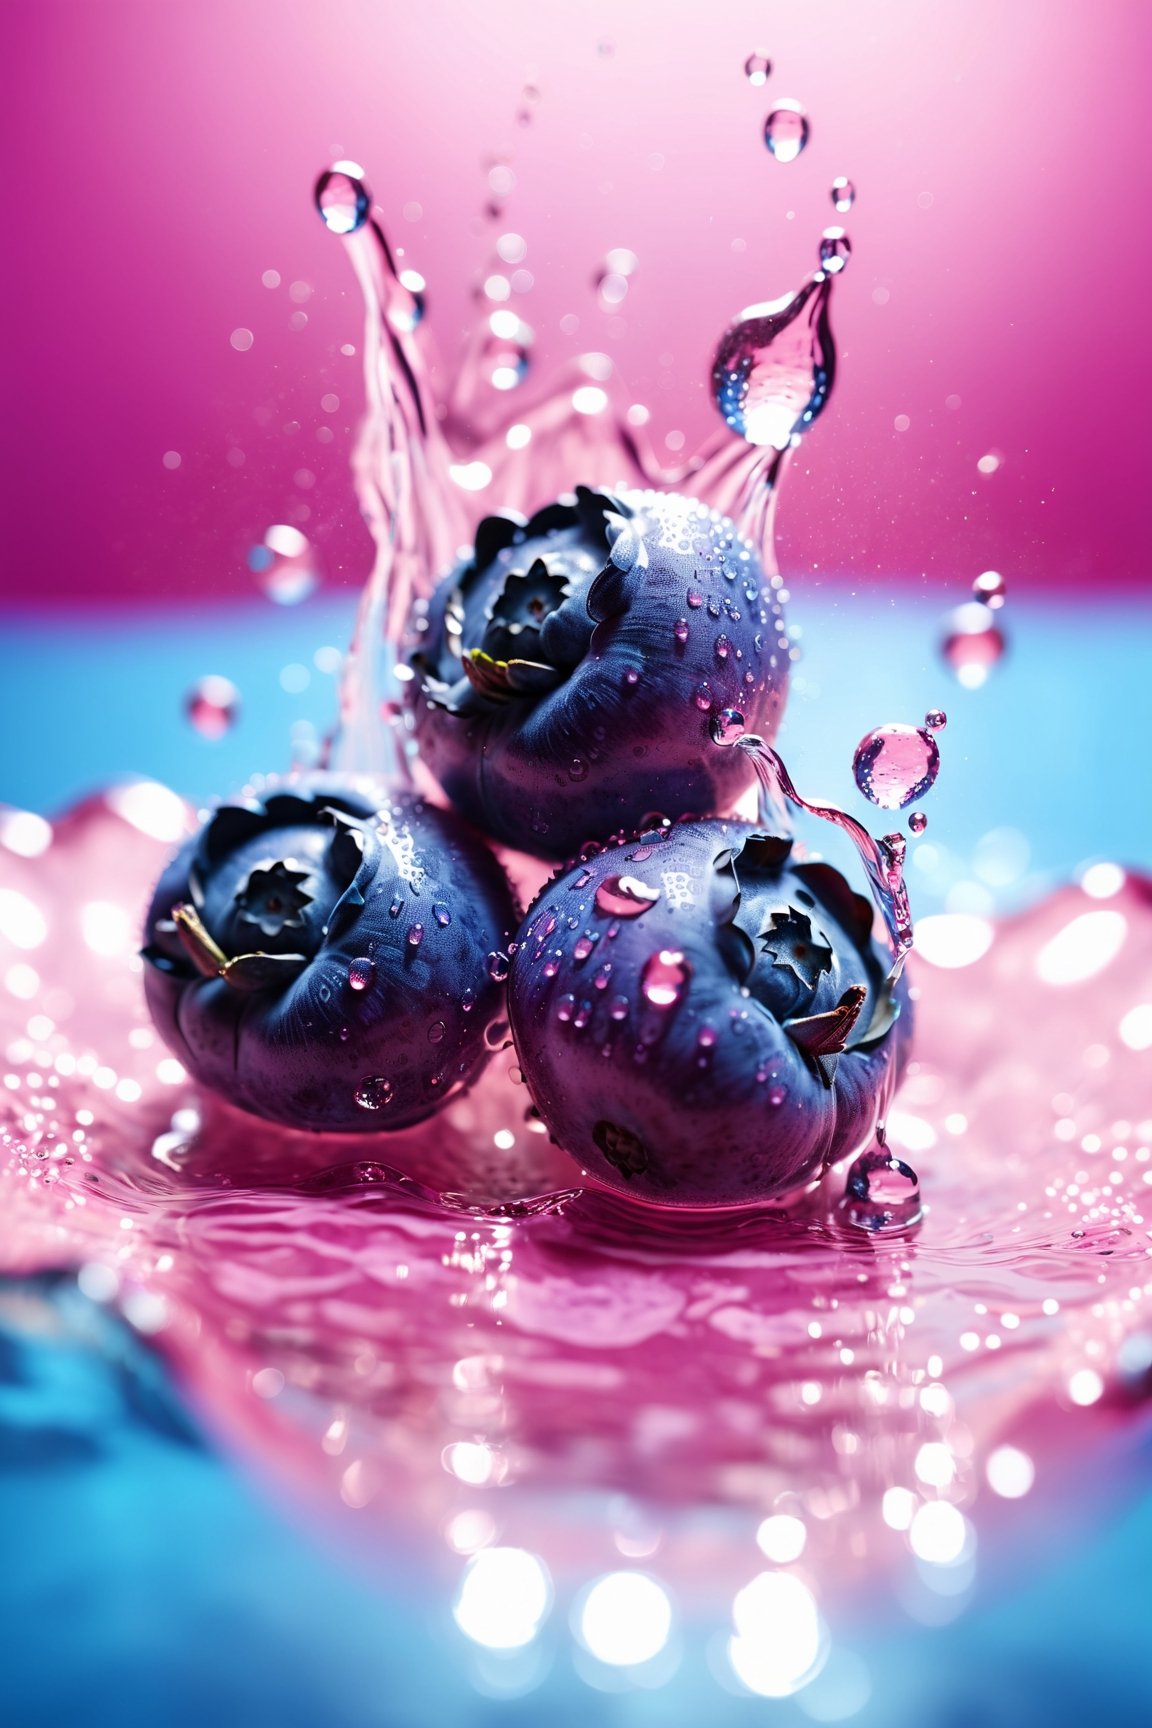 refreshing, vibrant glowing 3 blueberries, floating in the water, macro photography, dew drops, pink lighting, glitters in the water, refreshing , in the style of a product hero shot in motion, dynamic magazine ad image, photorealism, flowing water background, sunshine, sparkling in the water
